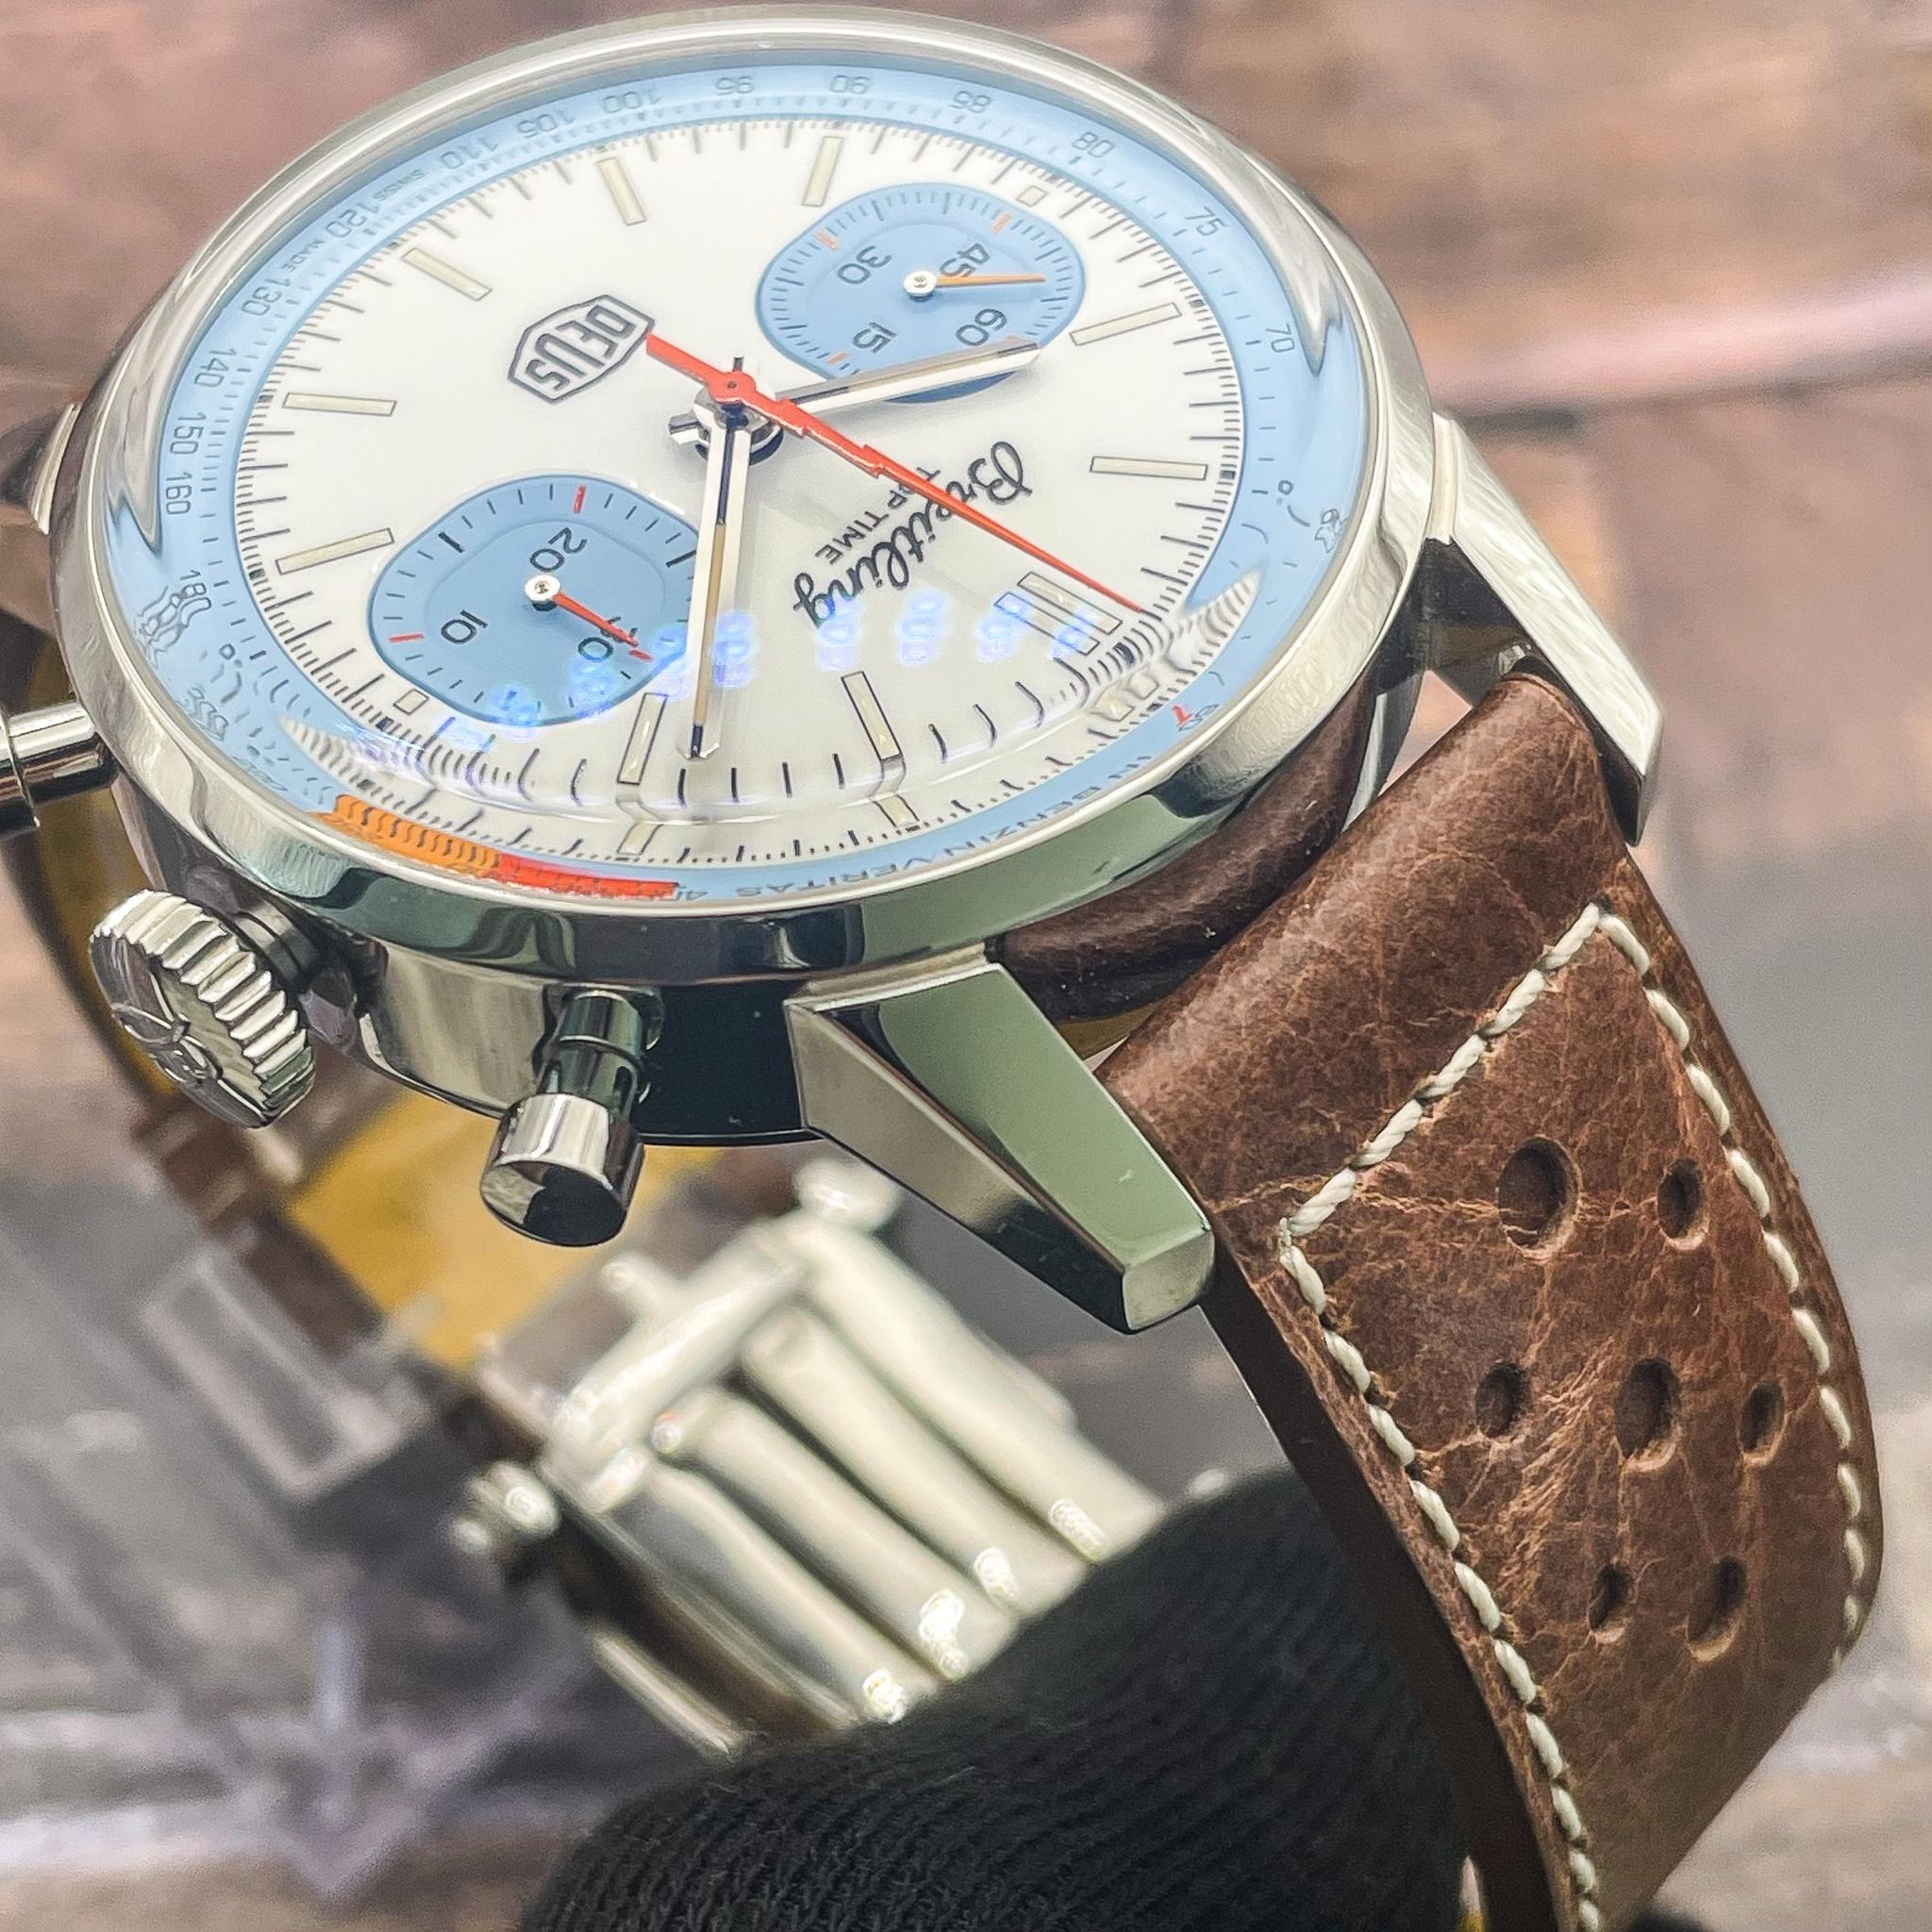 WTS] Breitling Top Time Deus Limited Edition One of 2000 41mm B&P